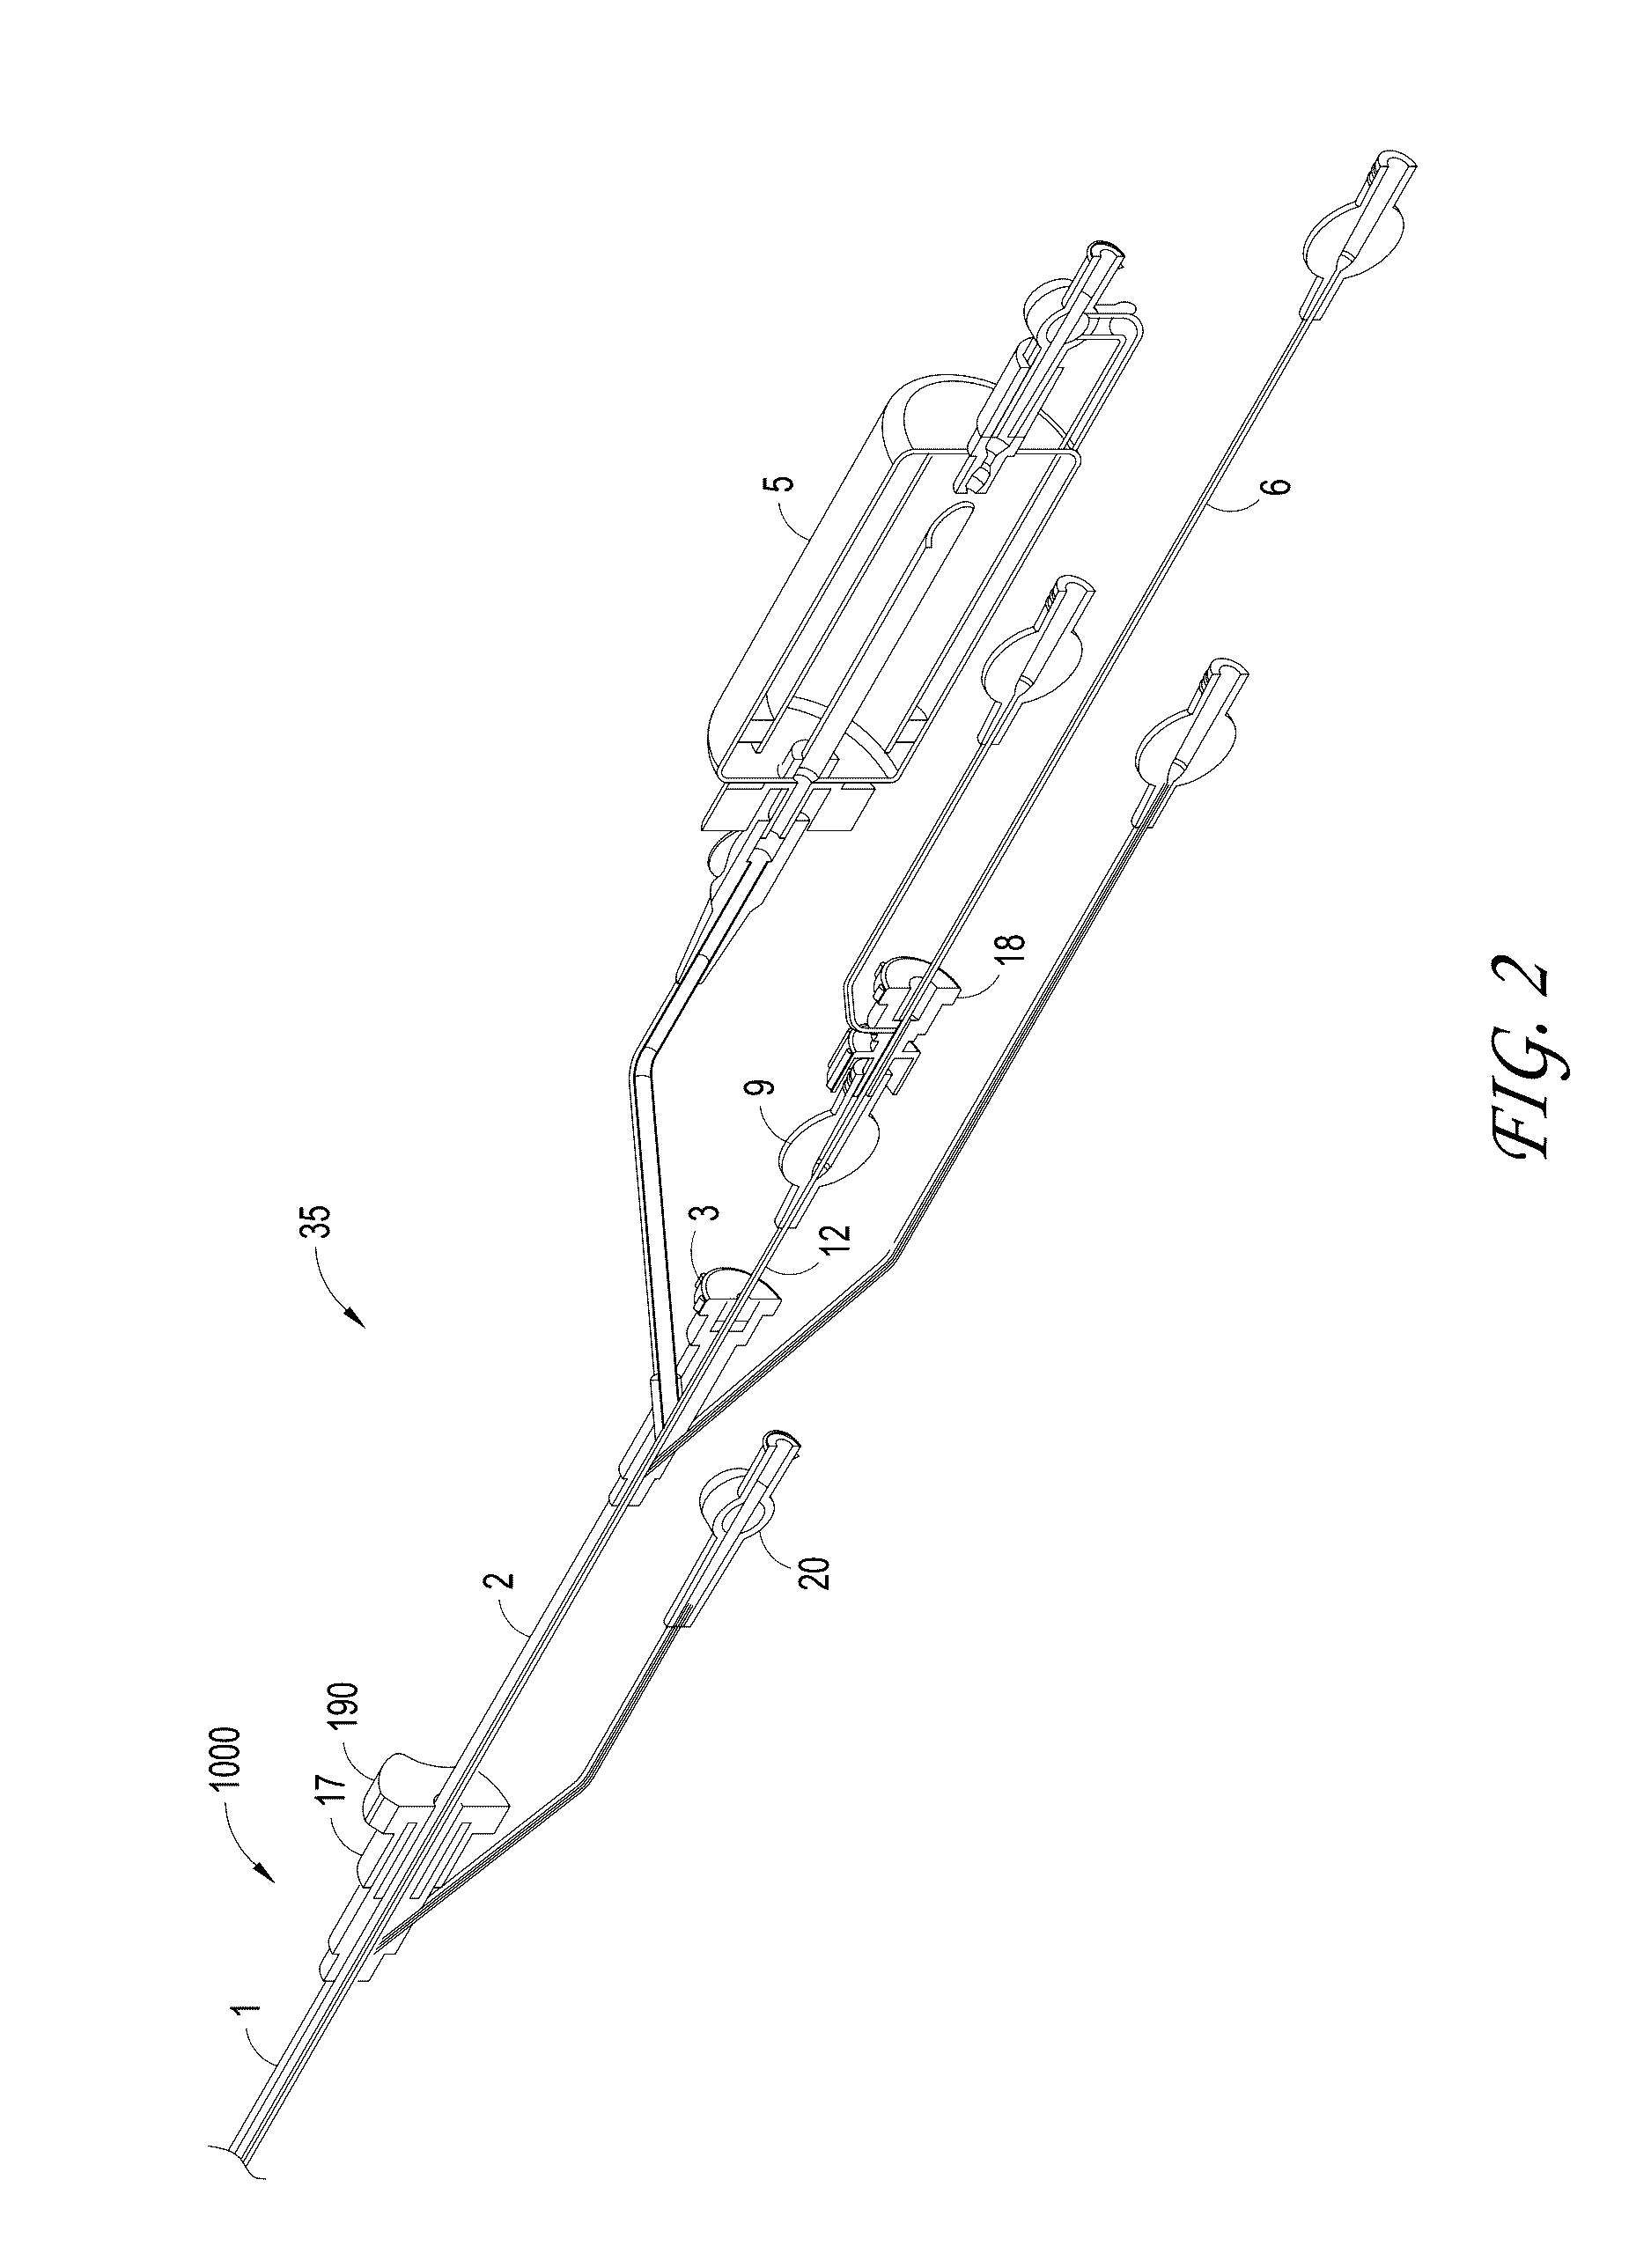 Axial lengthening thrombus capture system